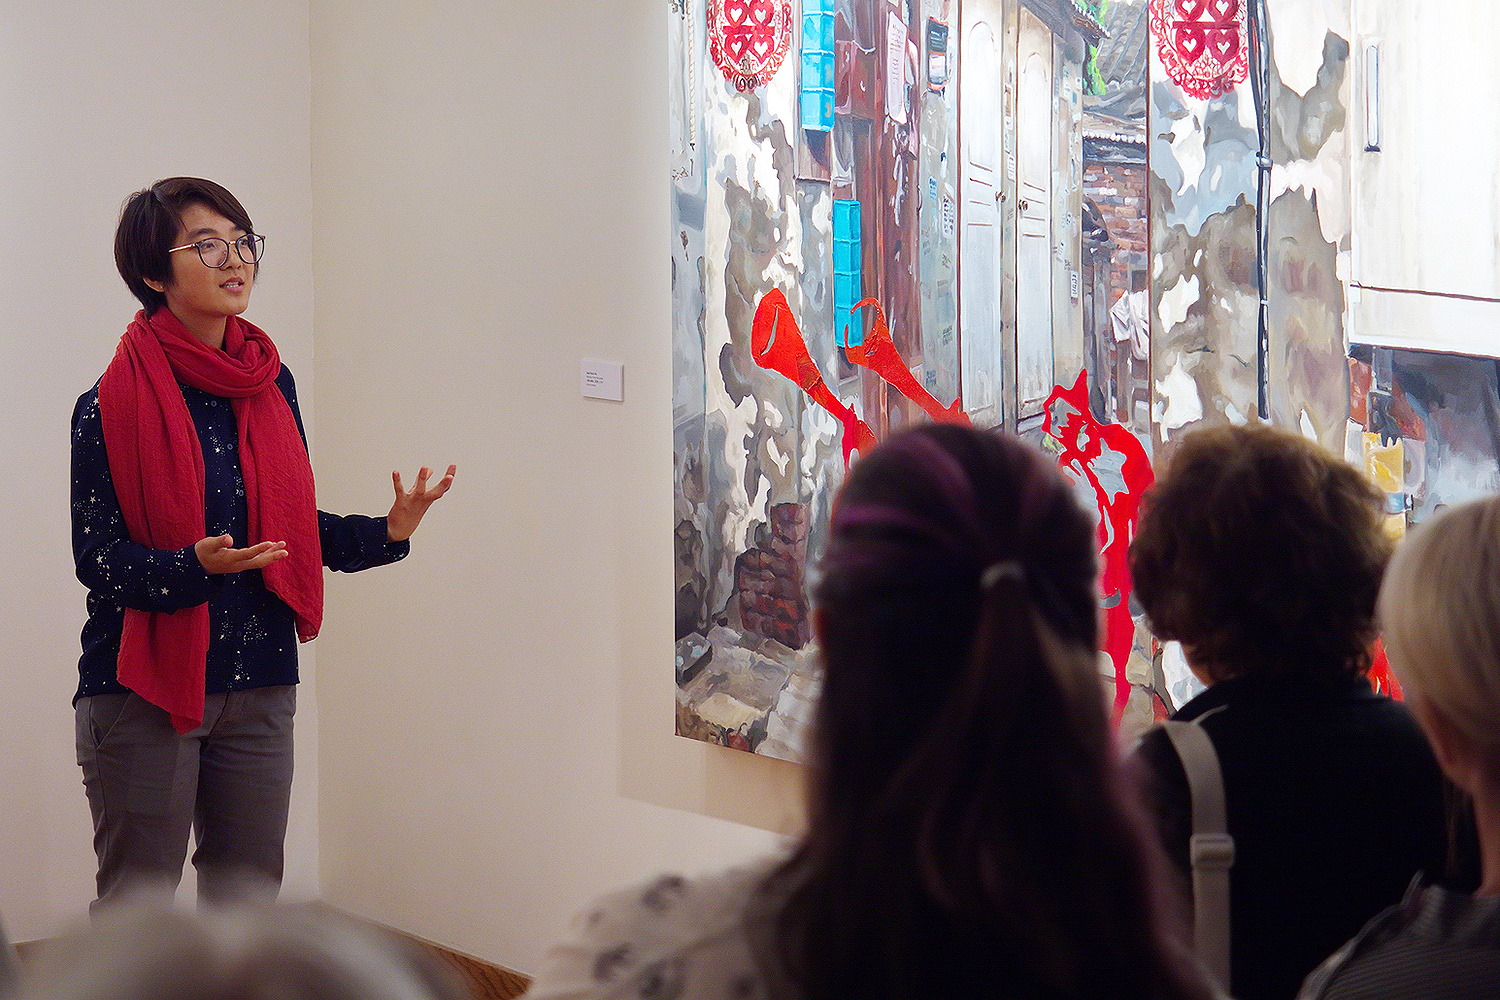 On Sept. 20, Ma presented an artists talk inside the gallery. (BEIJING | 北京) consists of a series of five paintings based on her experiences in Beijing. "I feel as though I made my memories real by building my own city through the process of painting," she said.